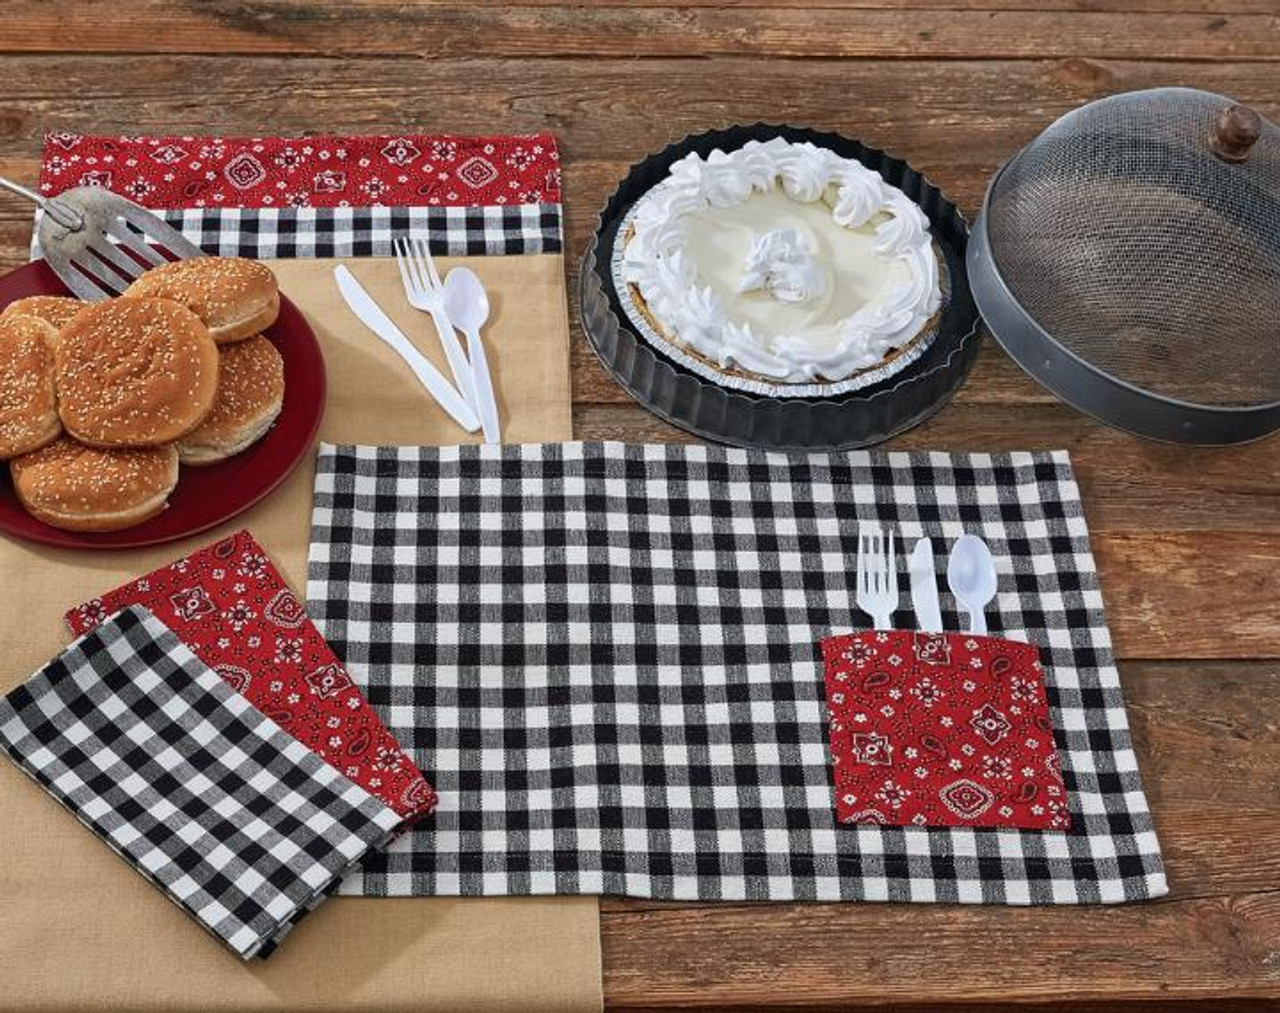 Grillin' & Chillin' Kitchen & Dining Collection - Country Village Shoppe